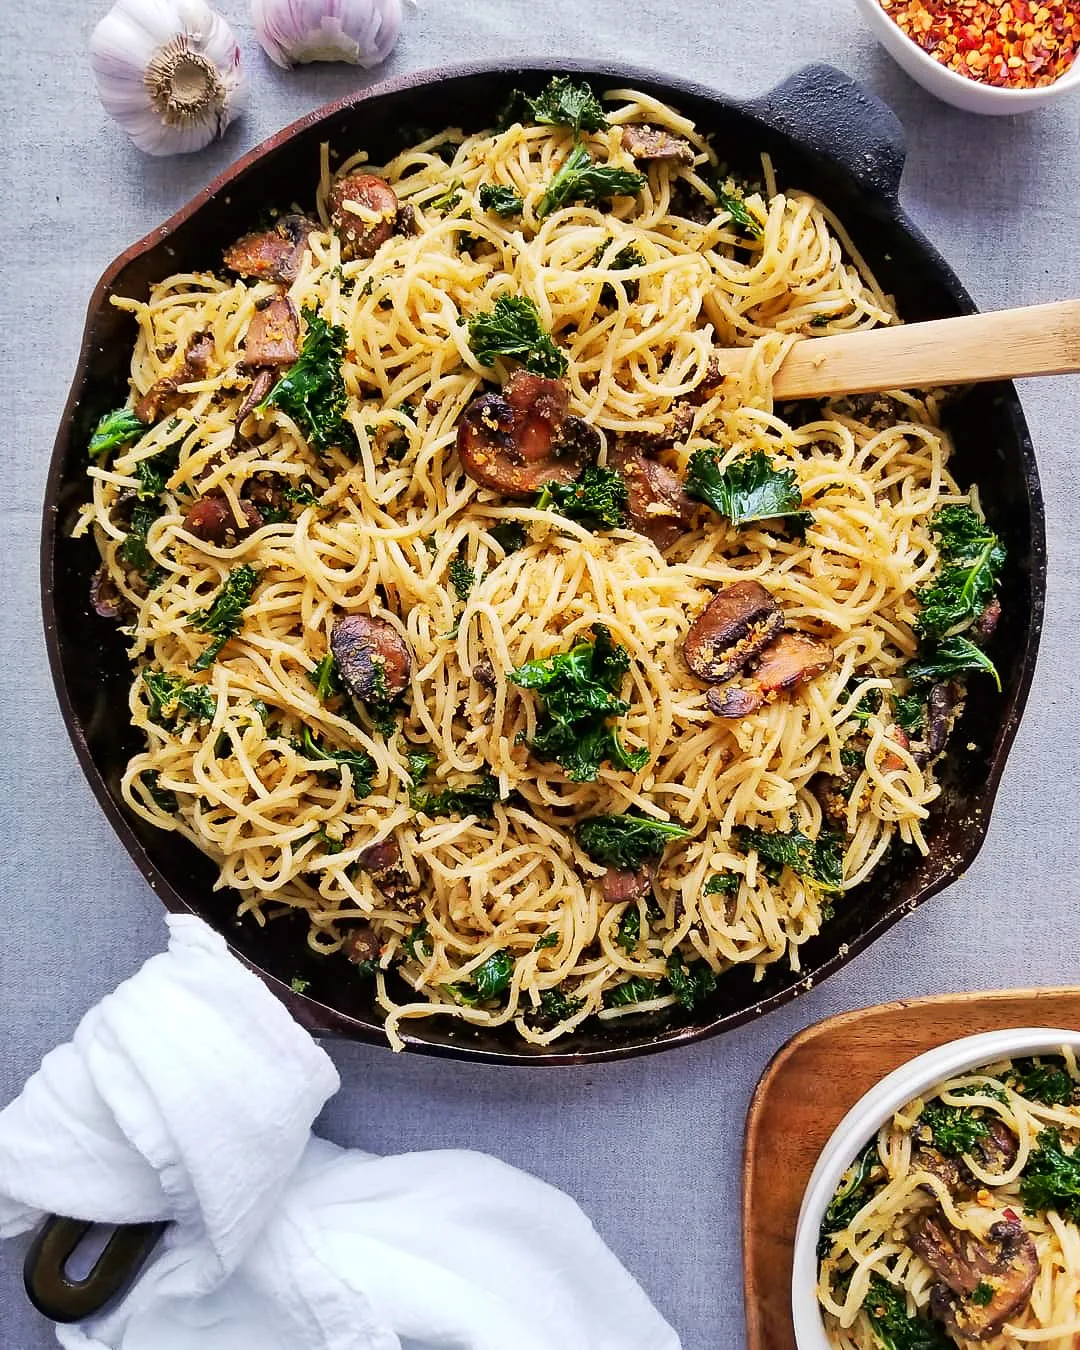 Cast iron skillet filled with spaghetti noodles, seared mushrooms and kale